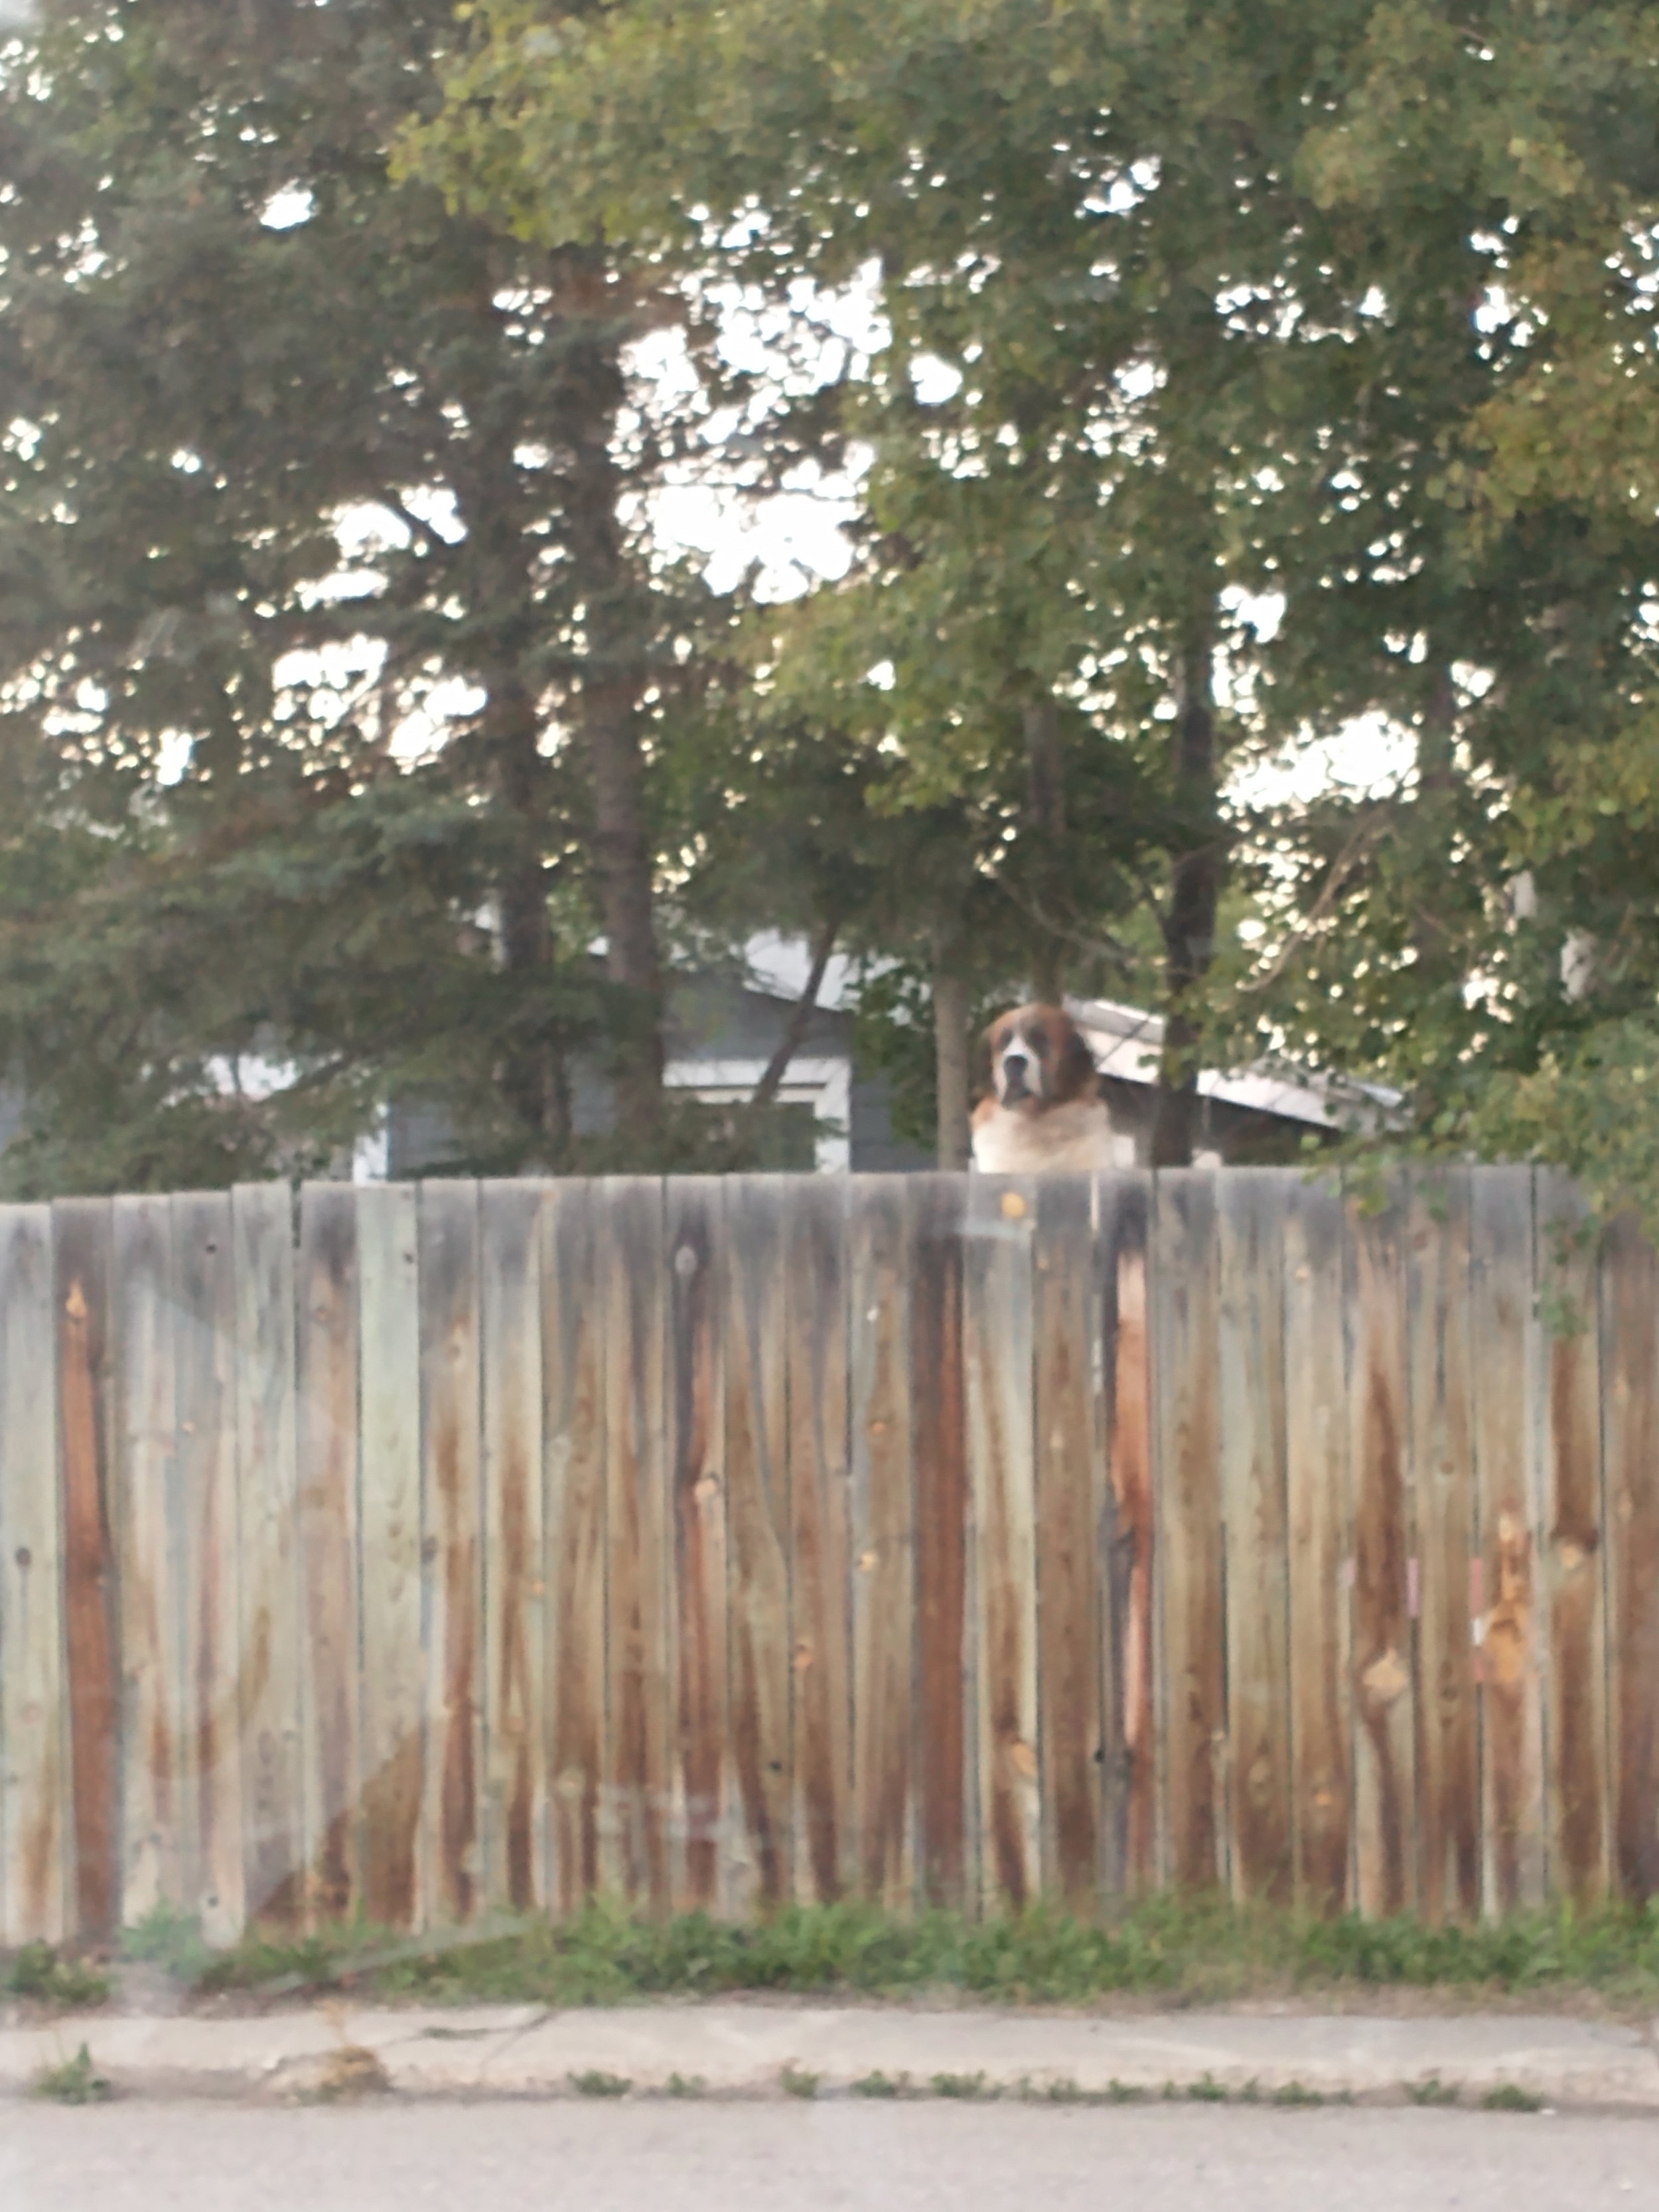 This giant St-Bernard was barking at me while taking pics of the perogy. He was so mad. I win, dog.